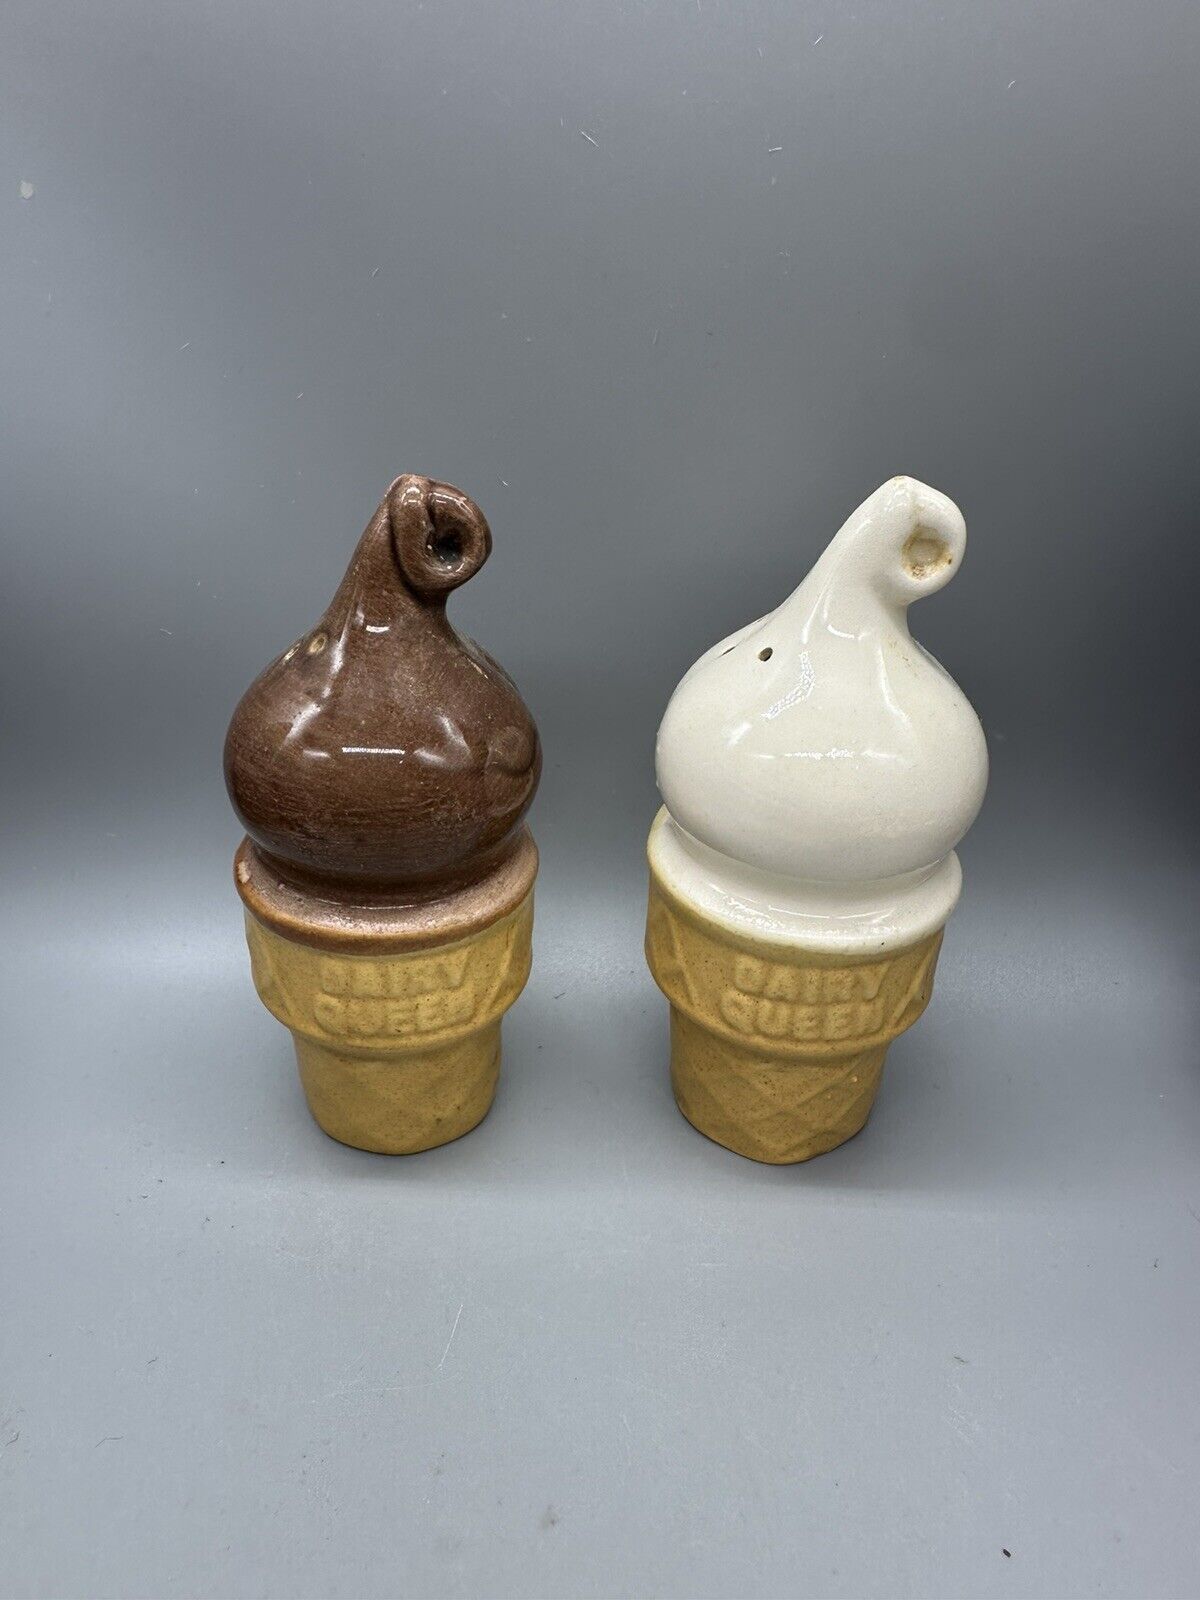 Vintage 1960s Dairy Queen Safe-T Cup ice cream cone Salt & Pepper Shakers